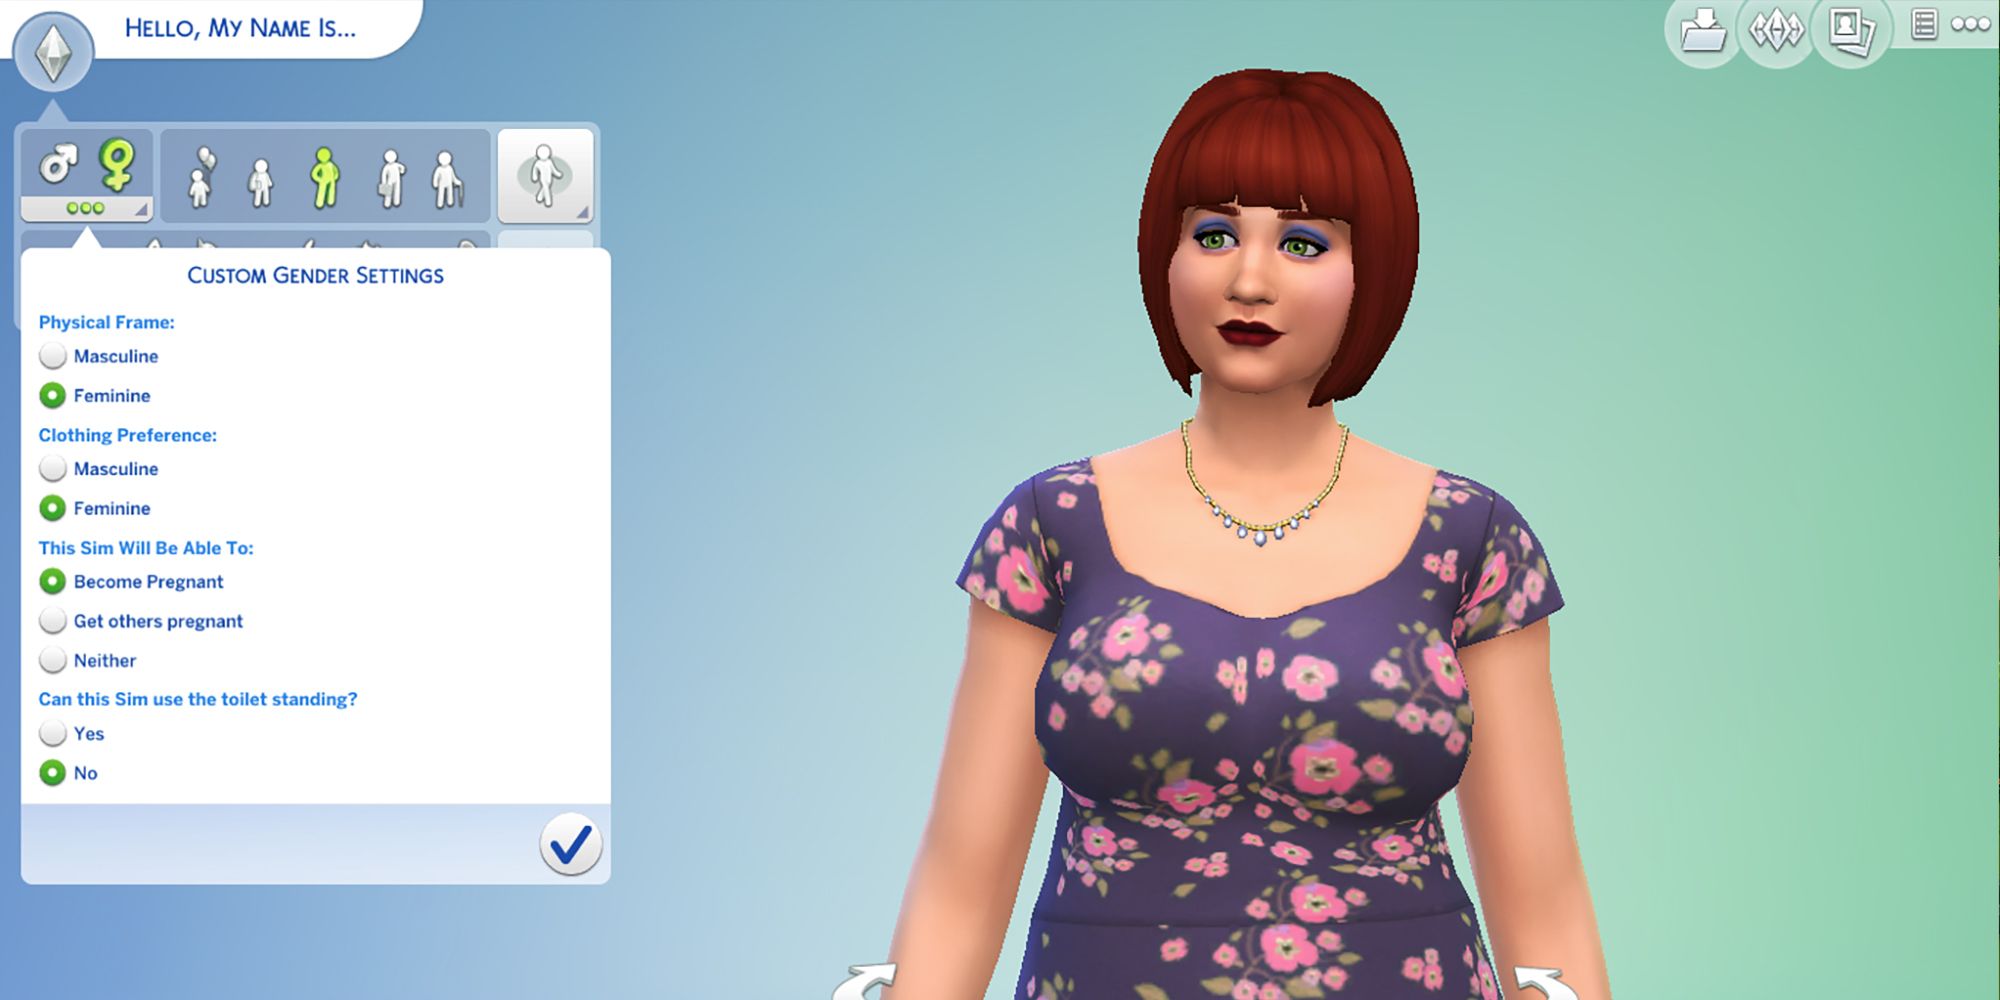 The New Gender Options In The Sims 4